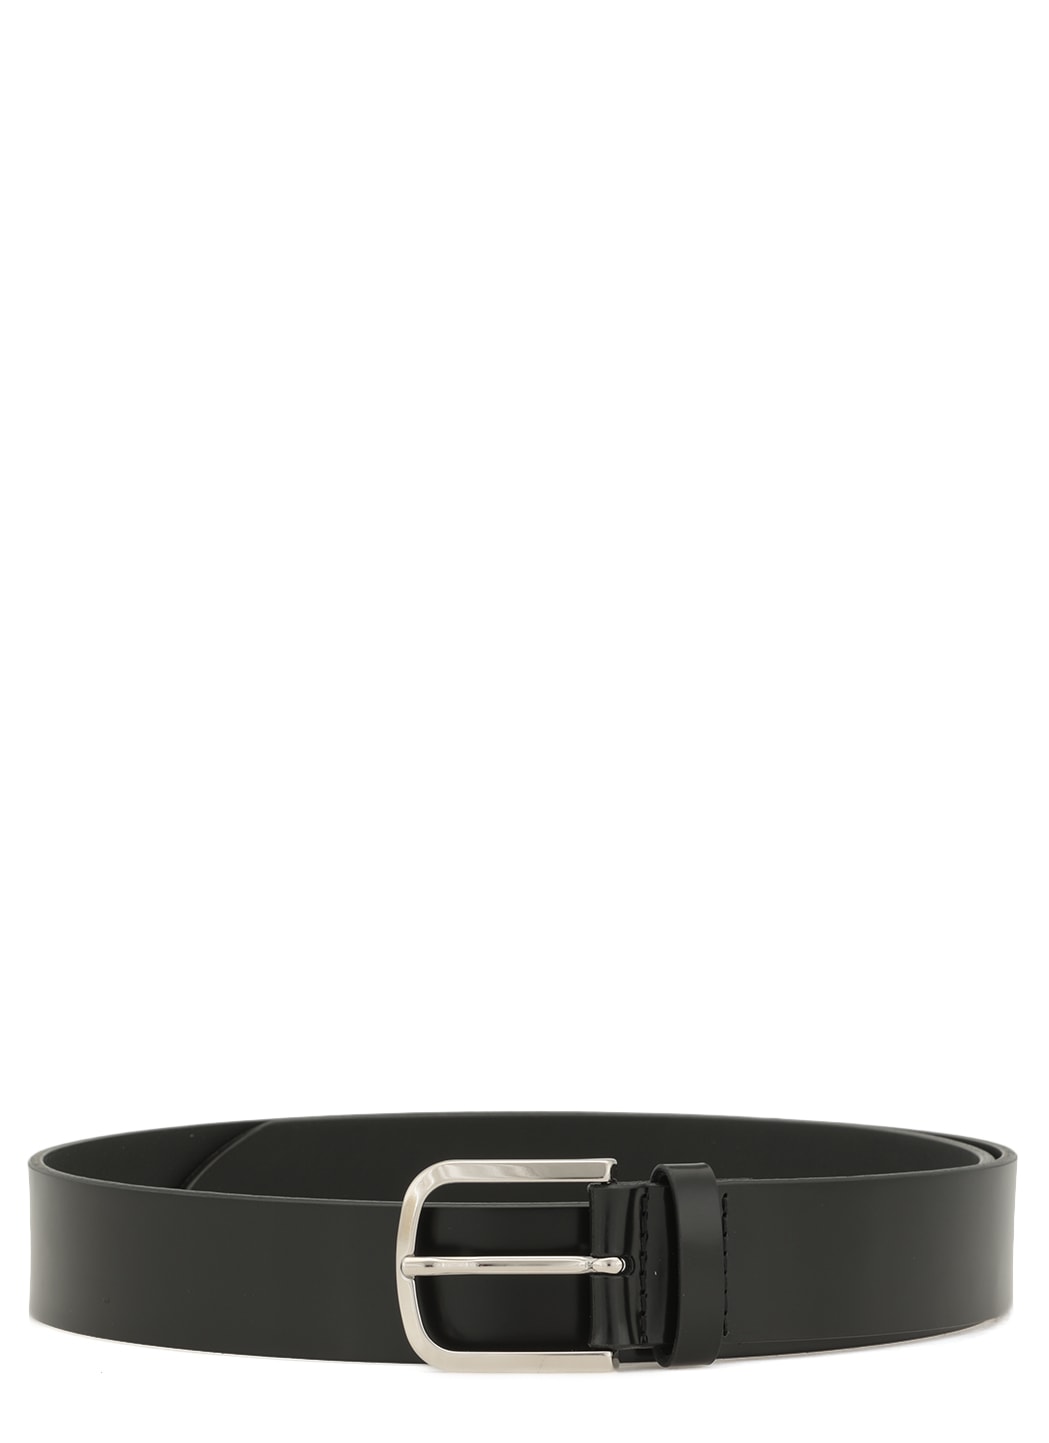 Orciani Smooth Leather Bright Belt